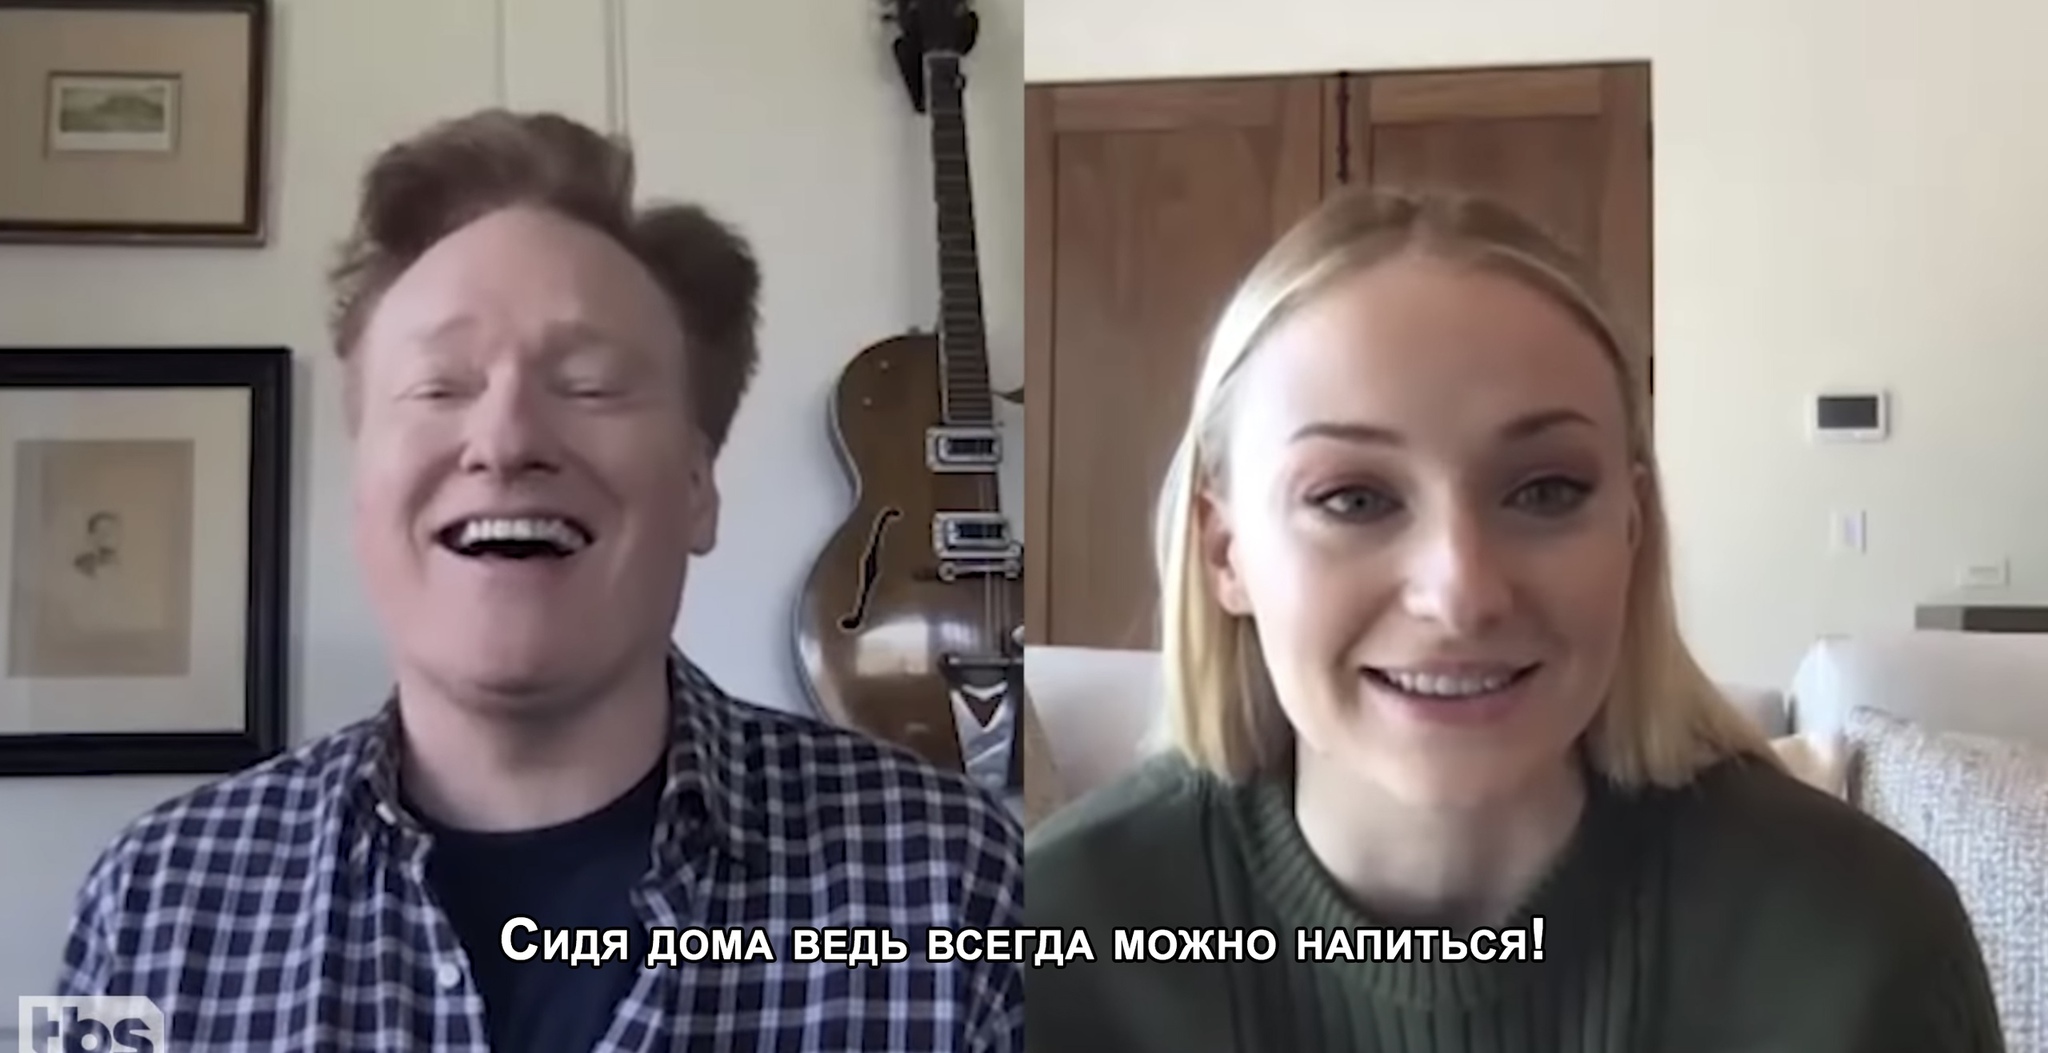 We are all a little Sophie Turner - Sophie Turner, Actors and actresses, Celebrities, Storyboard, Conan Obrien, Self-isolation, Quarantine, Longpost